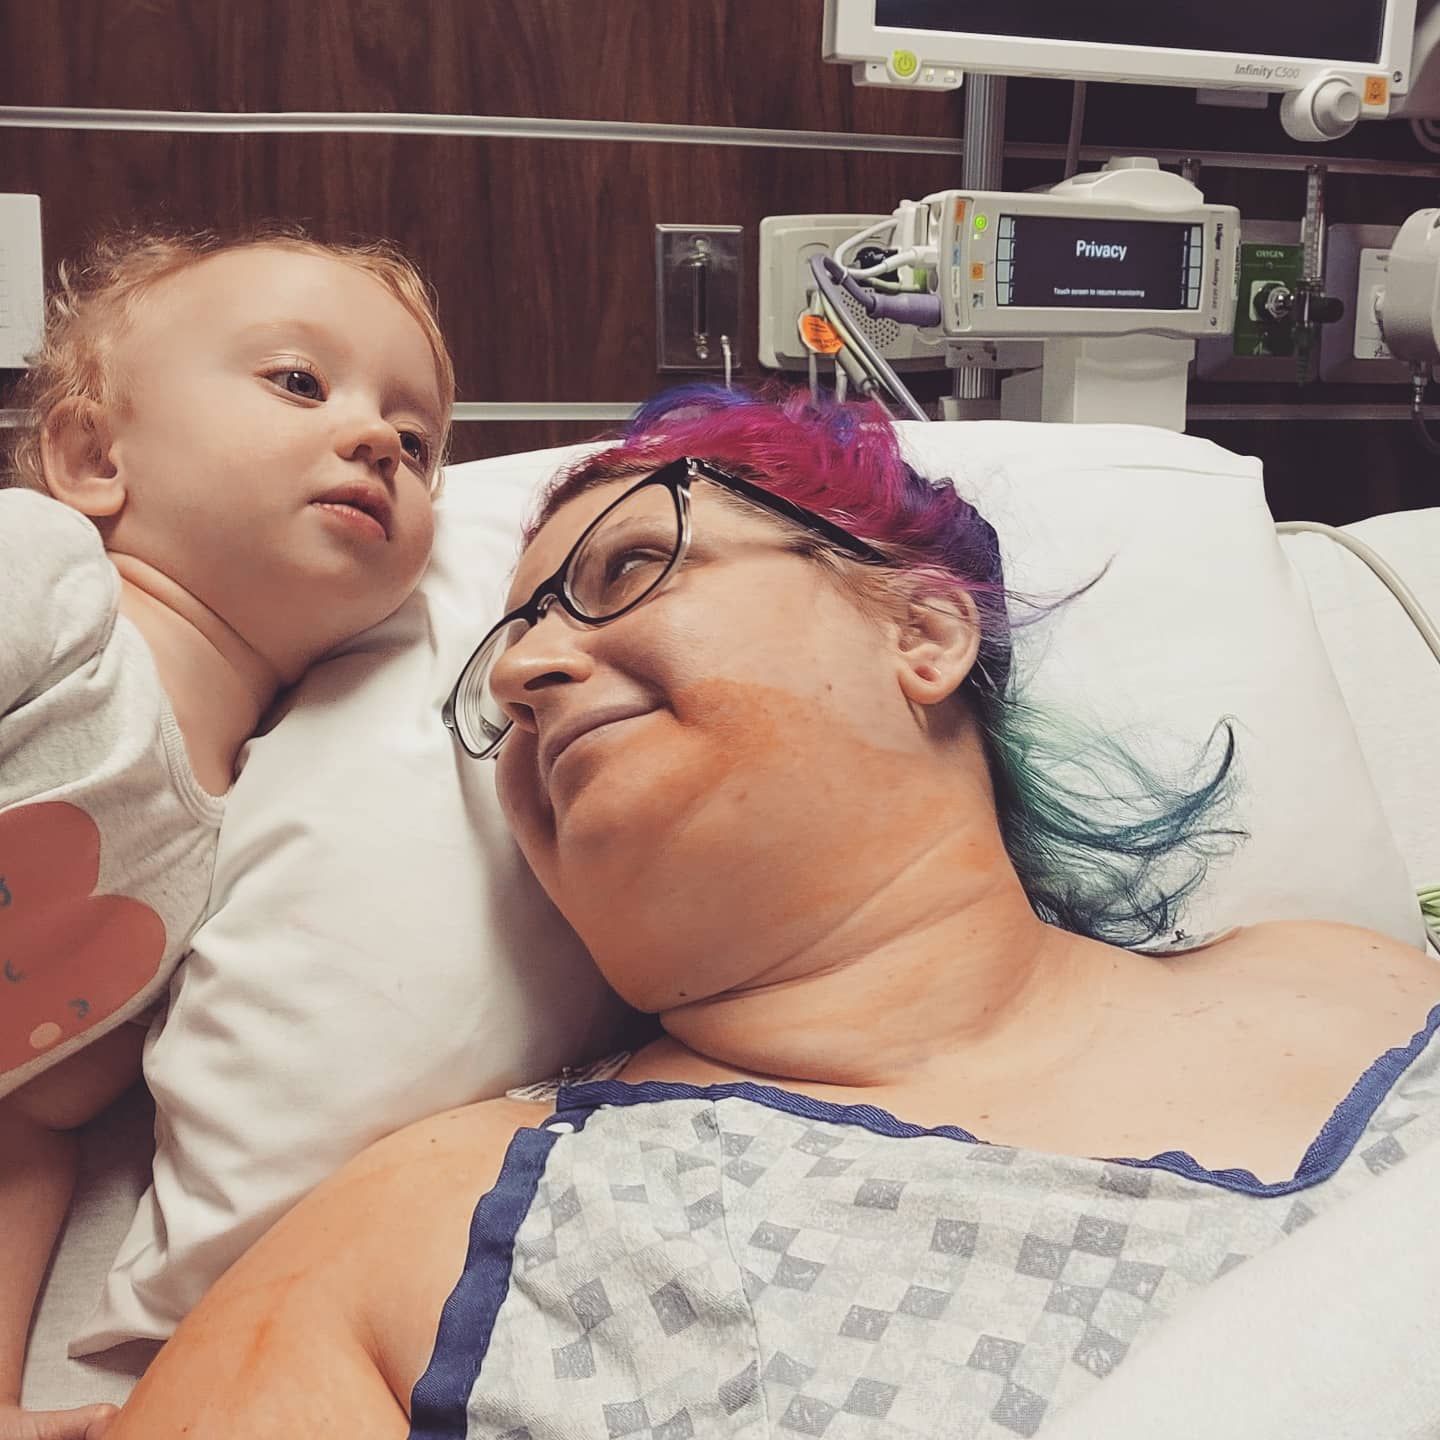 A girl just waking up from a double mastectomy surgery, lying in a hospital bed, smiling at her baby girl.